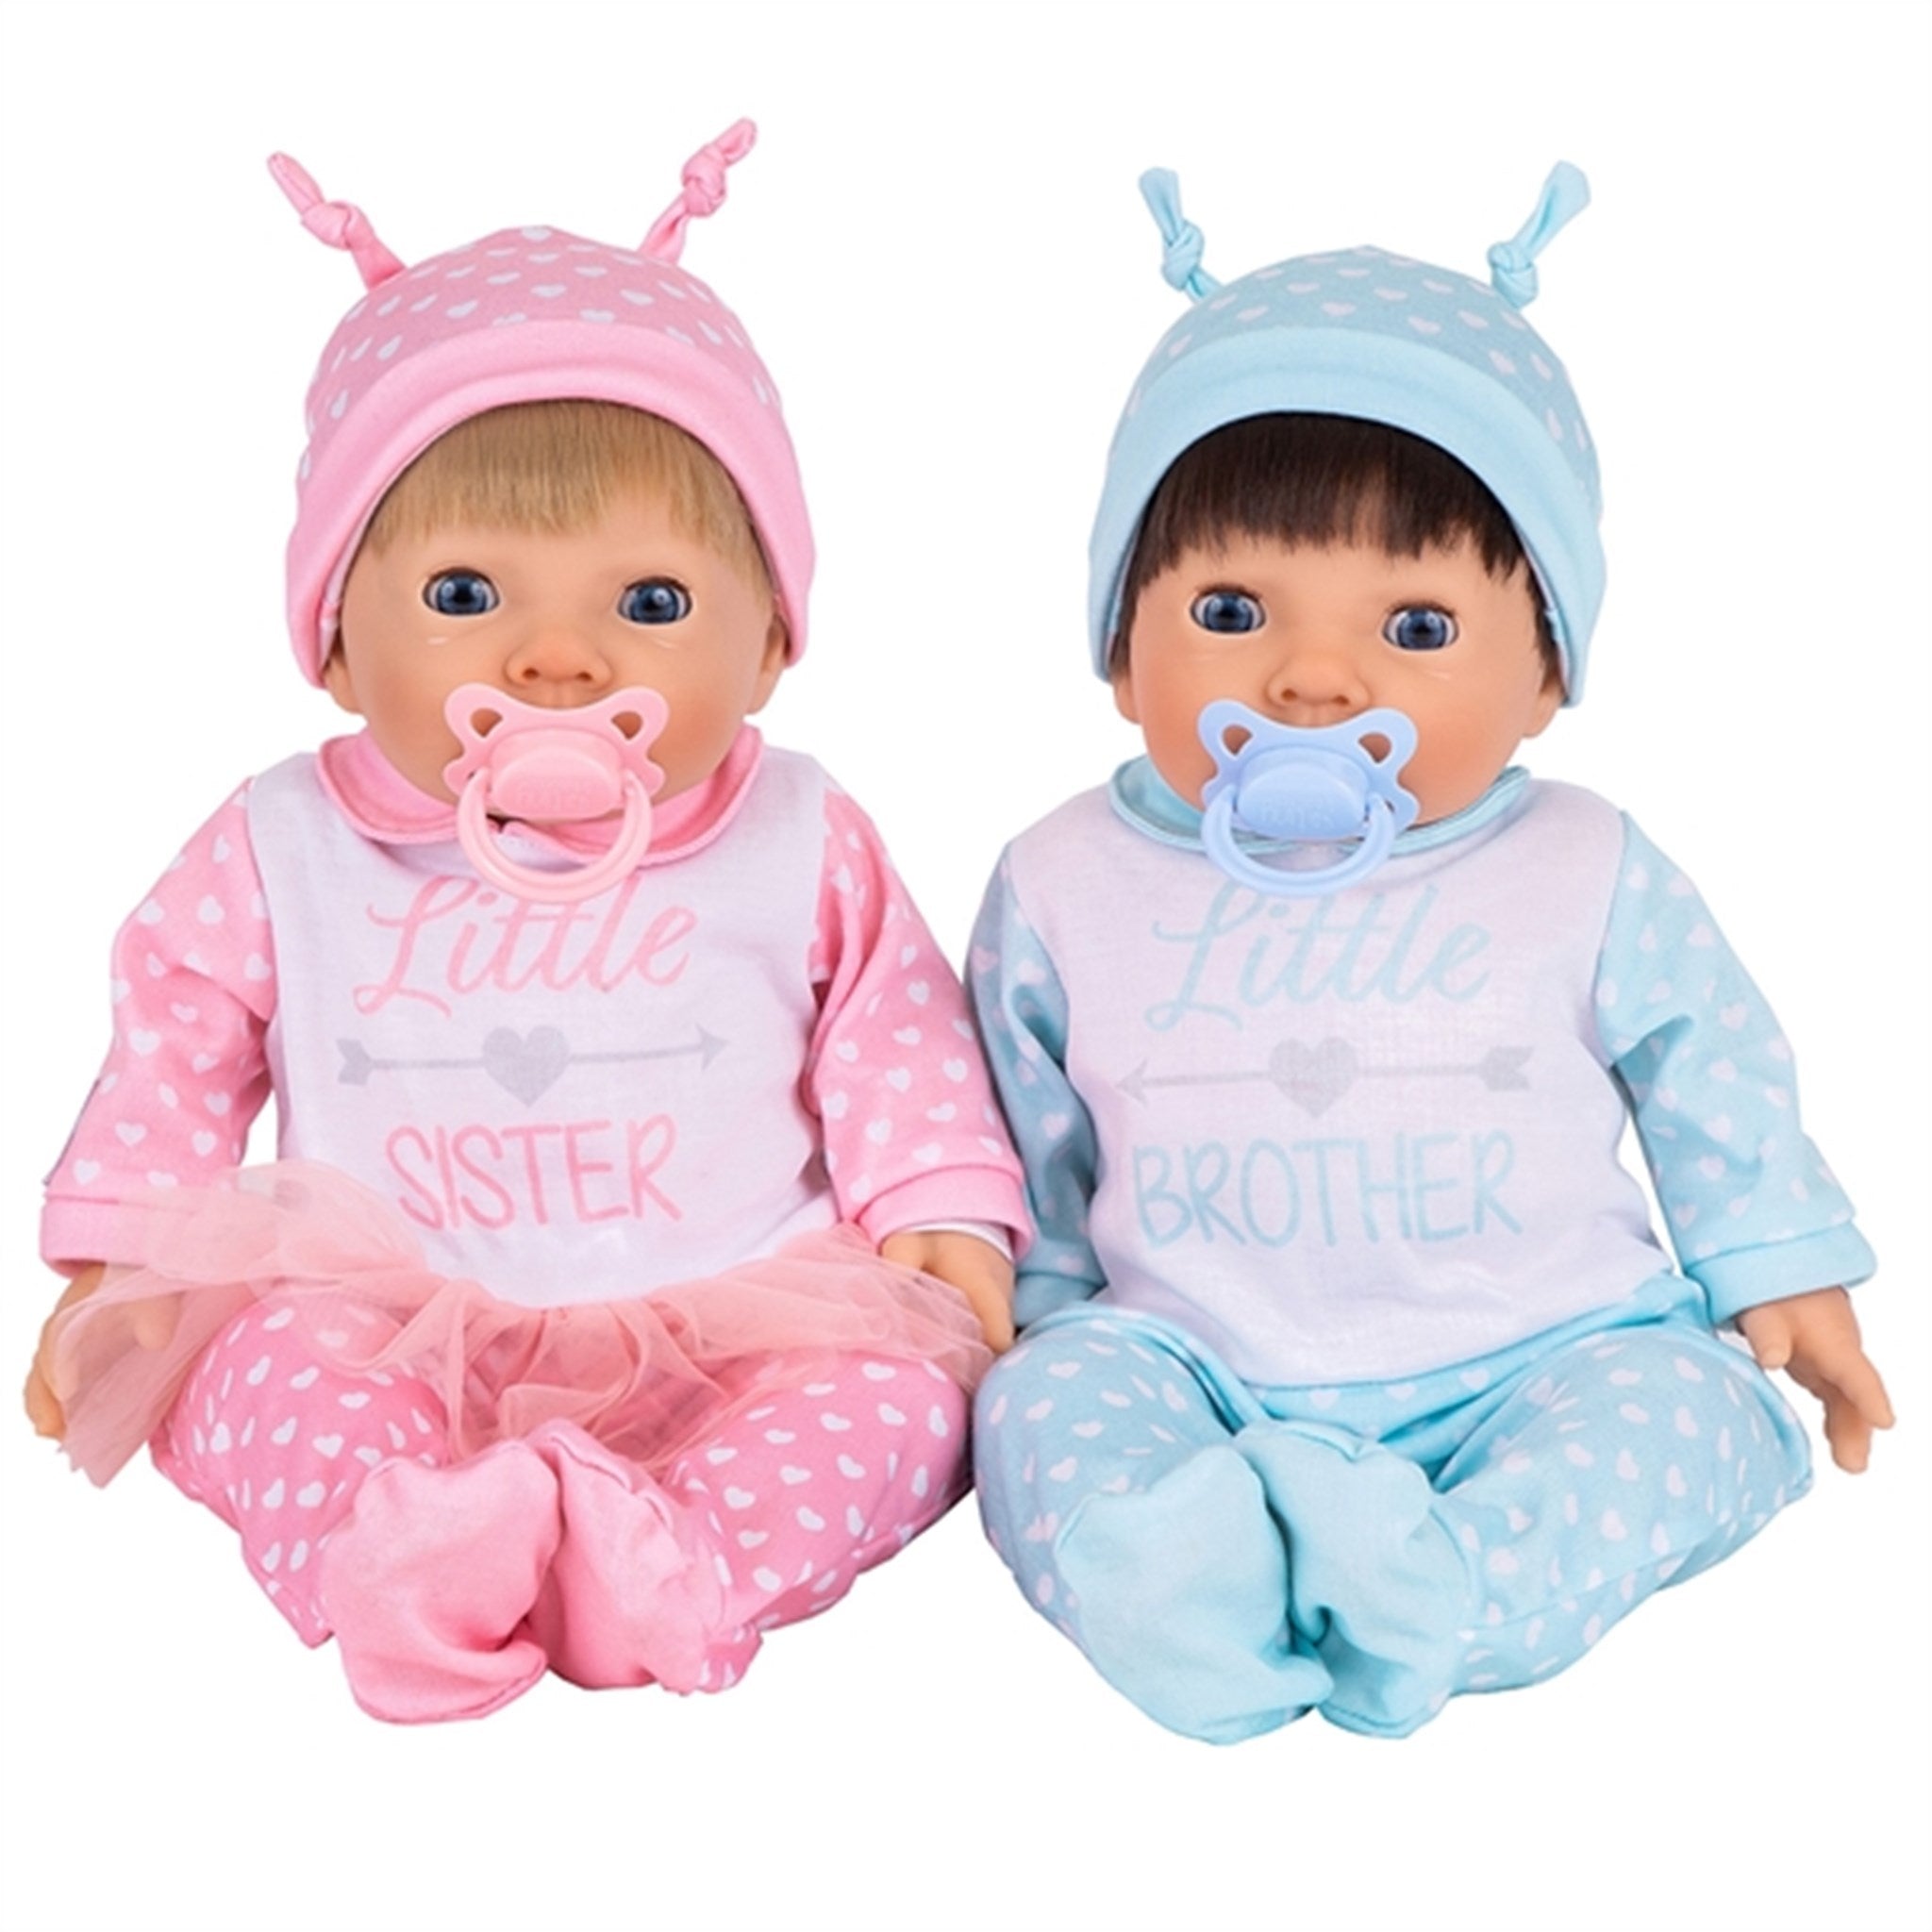 Tiny Treasures Twin Doll Set In Brother & Sister Outfit 2